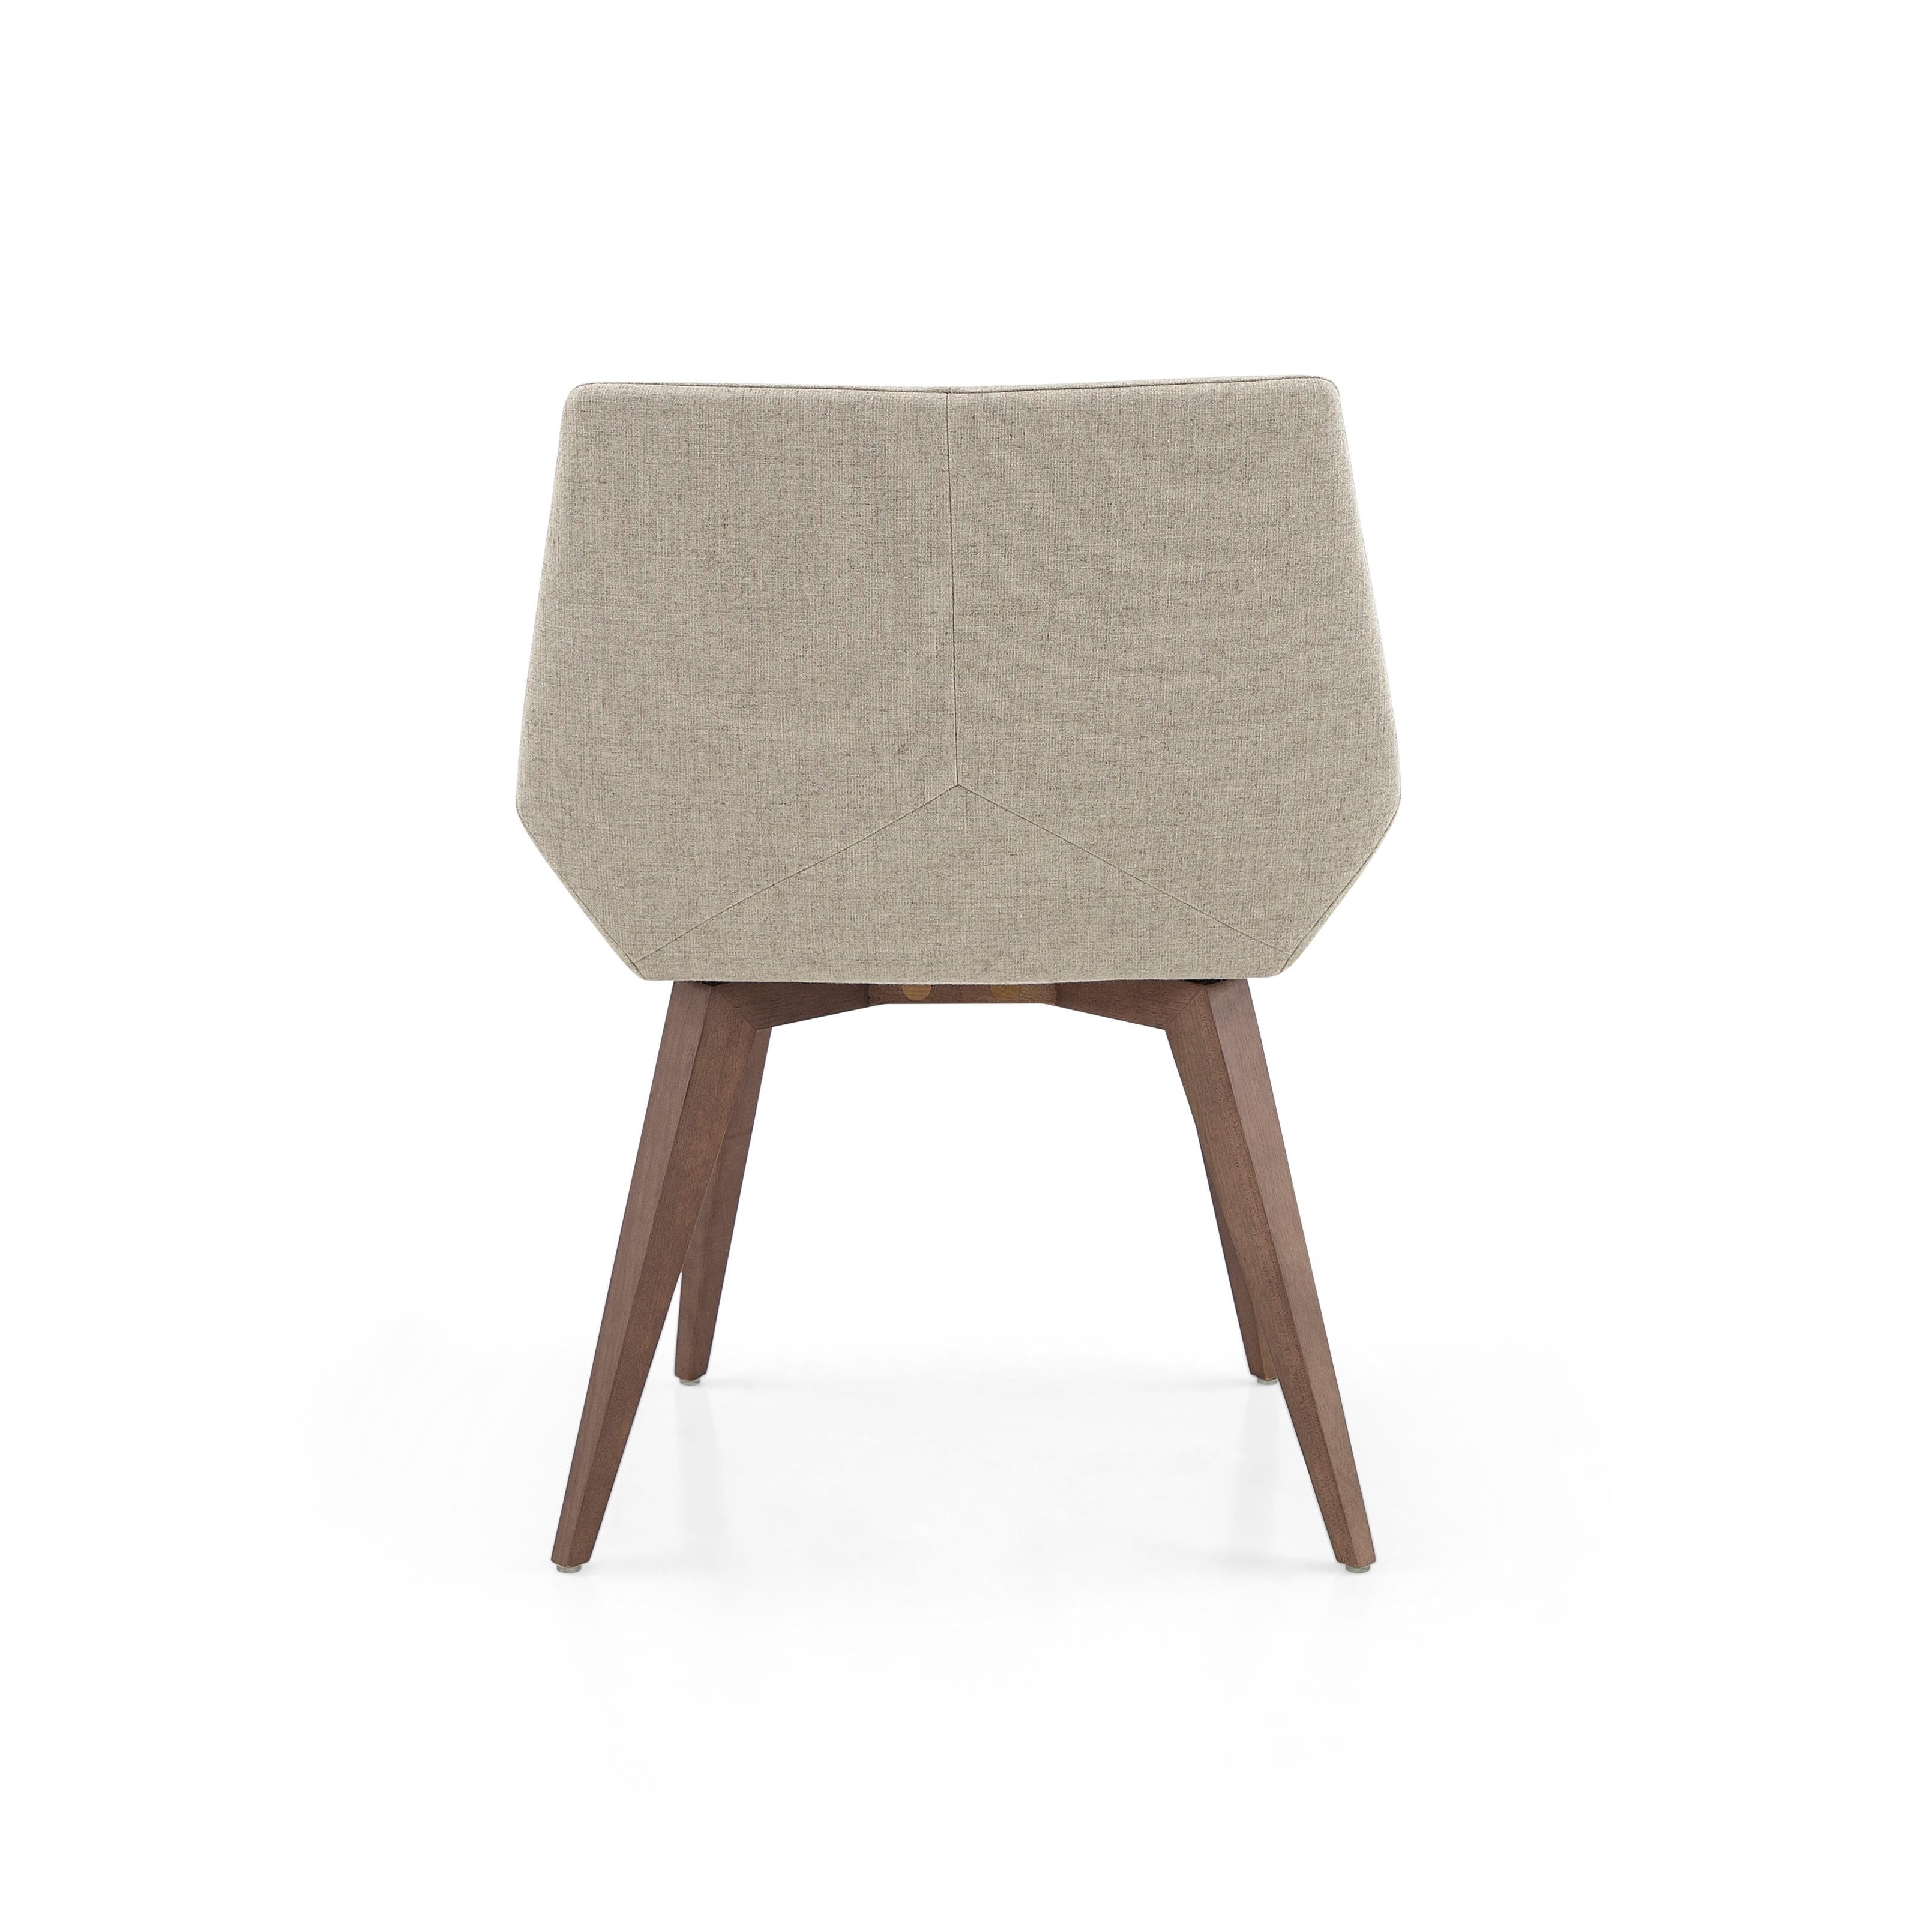 The Geometric dining chair as the name says has geometric shapes and pure lines with its walnut wooden legs with the seat all wrapped in a beautiful and soft ivory fabric. All of these small details thought by architects and designers by our Uultis